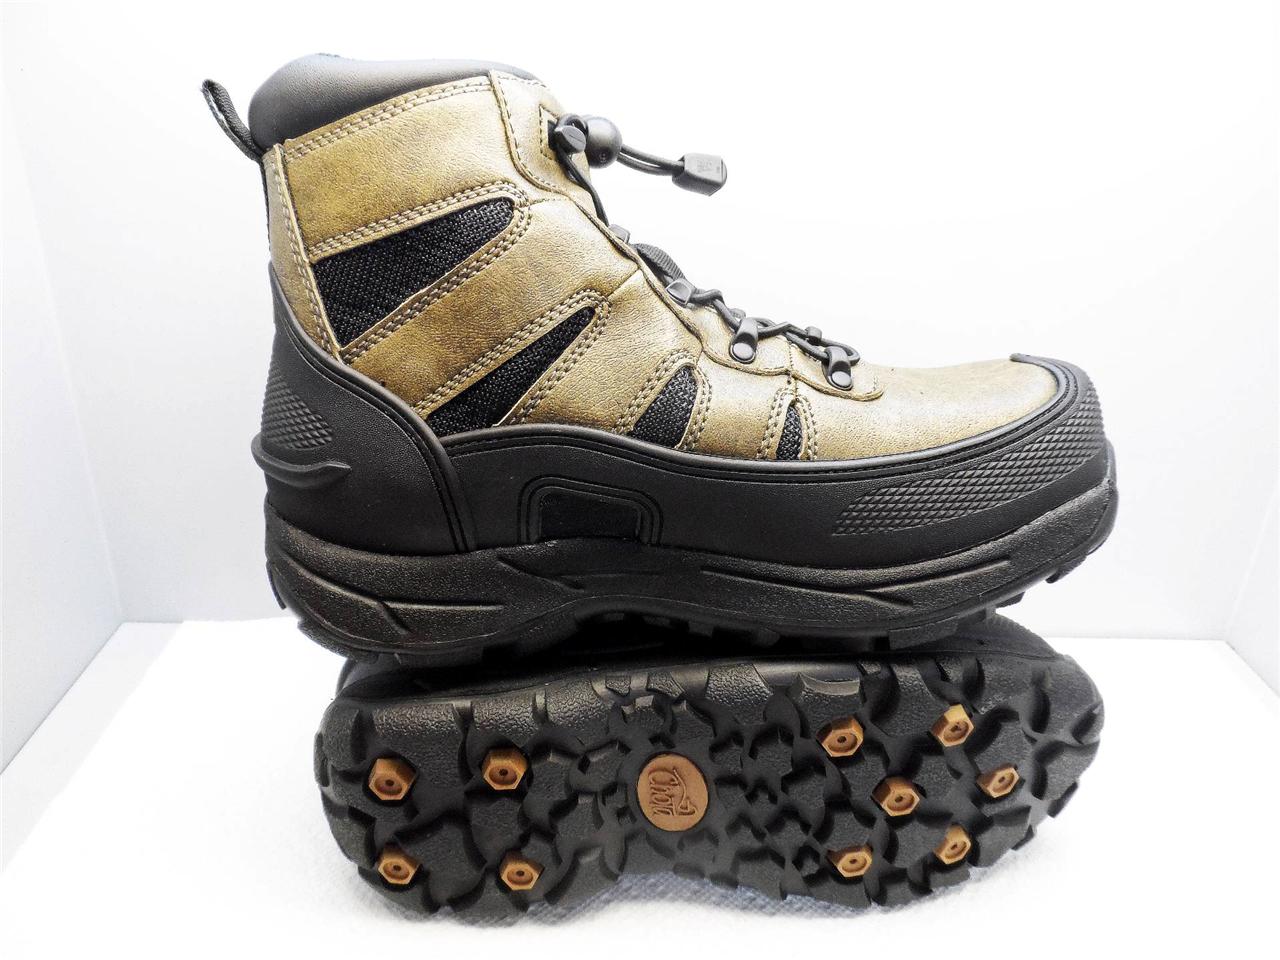 Chota Lost Creek Wading Boots/Shoes, QuickLace, Stud-Ready - FlyMasters ...